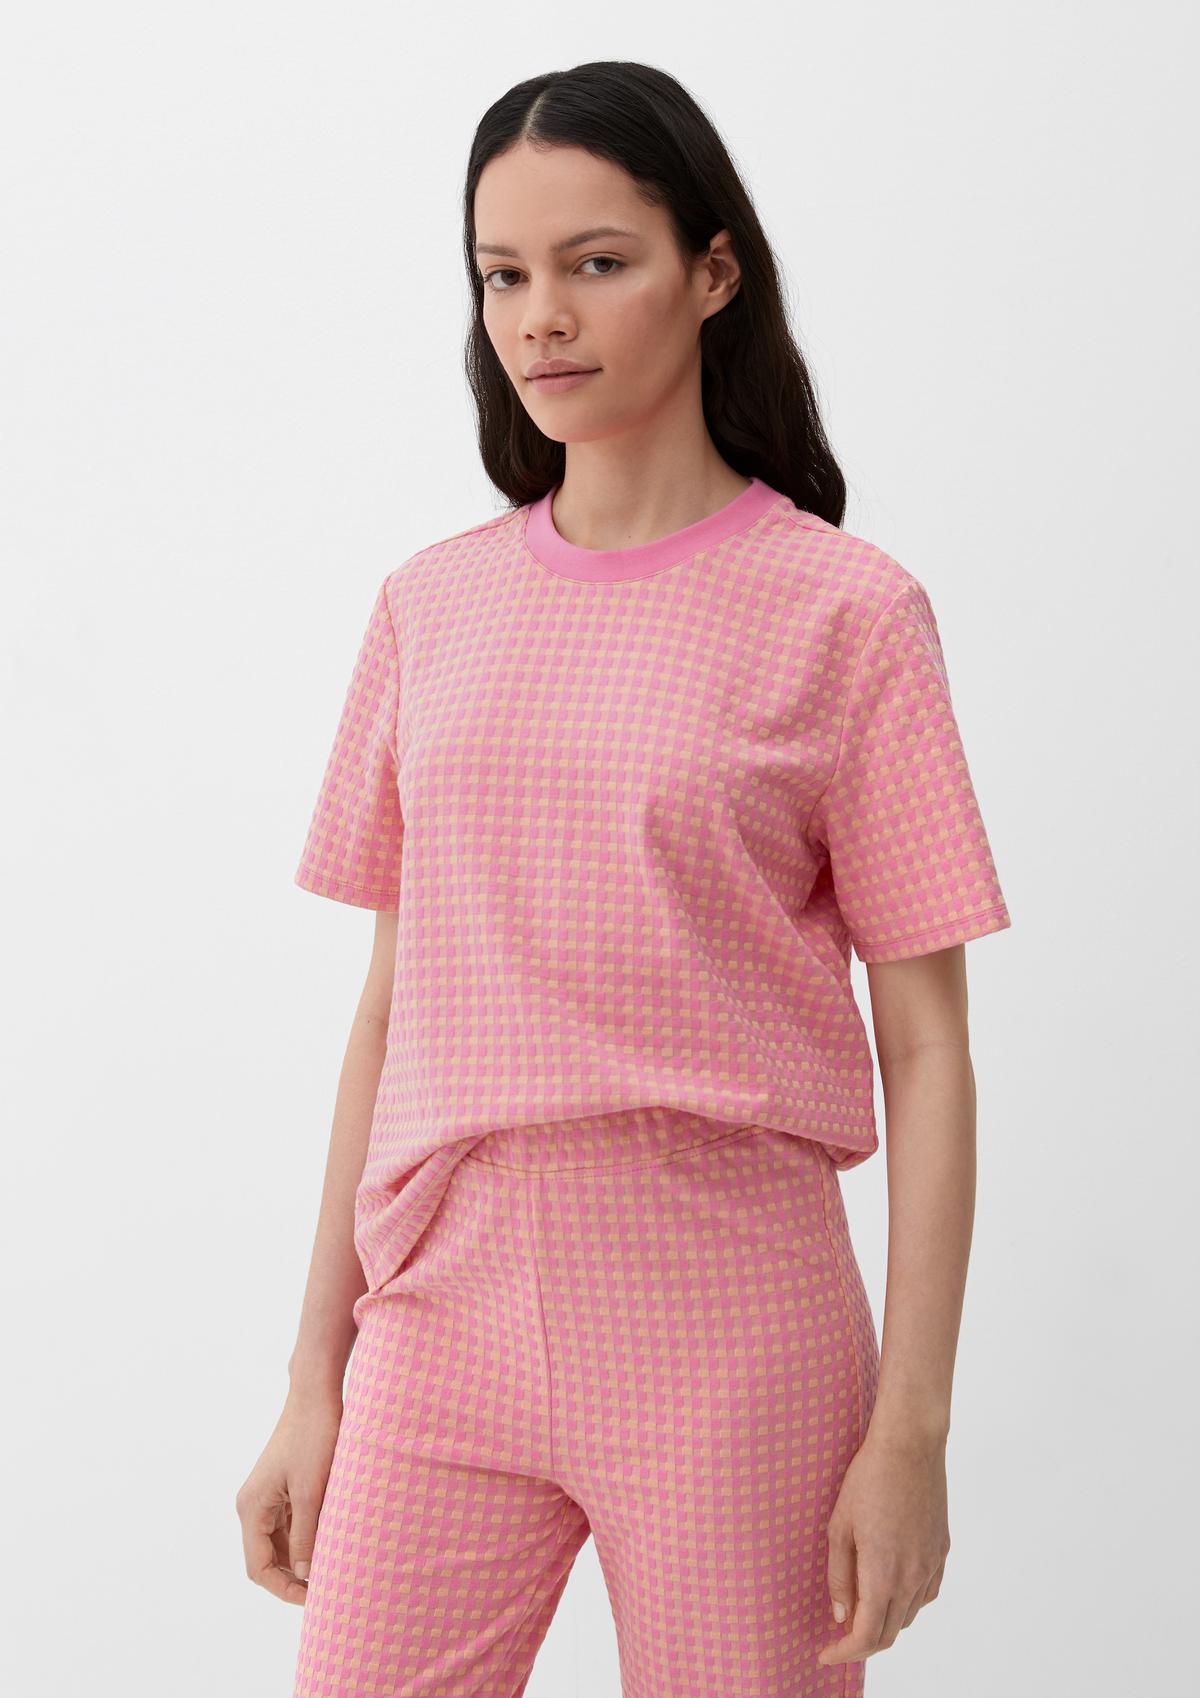 T-shirt with jacquard texture pink - a